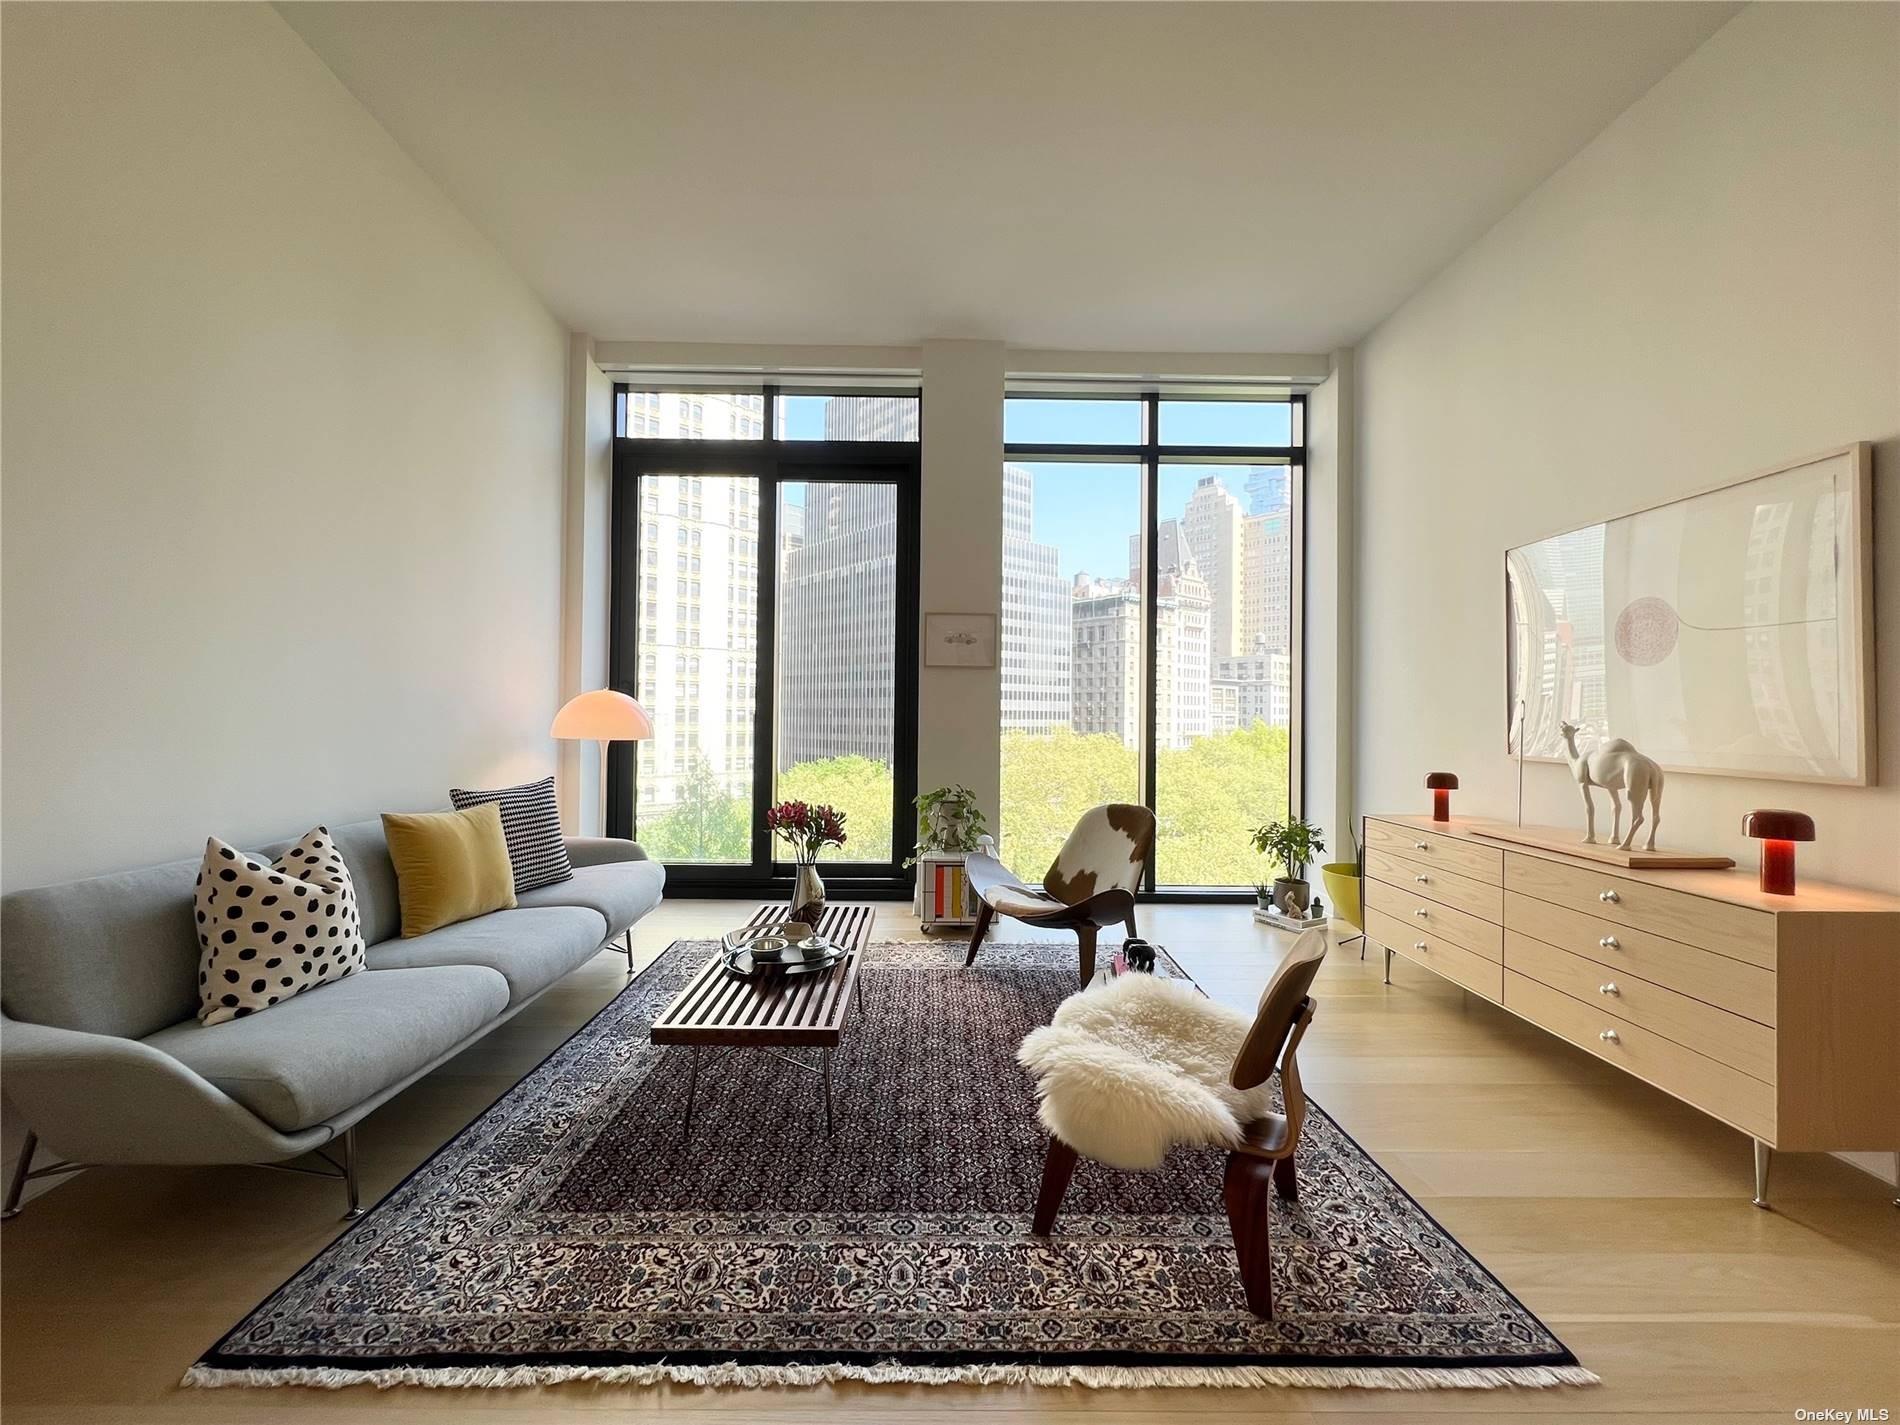 Property Image for 33 Park Row 7A